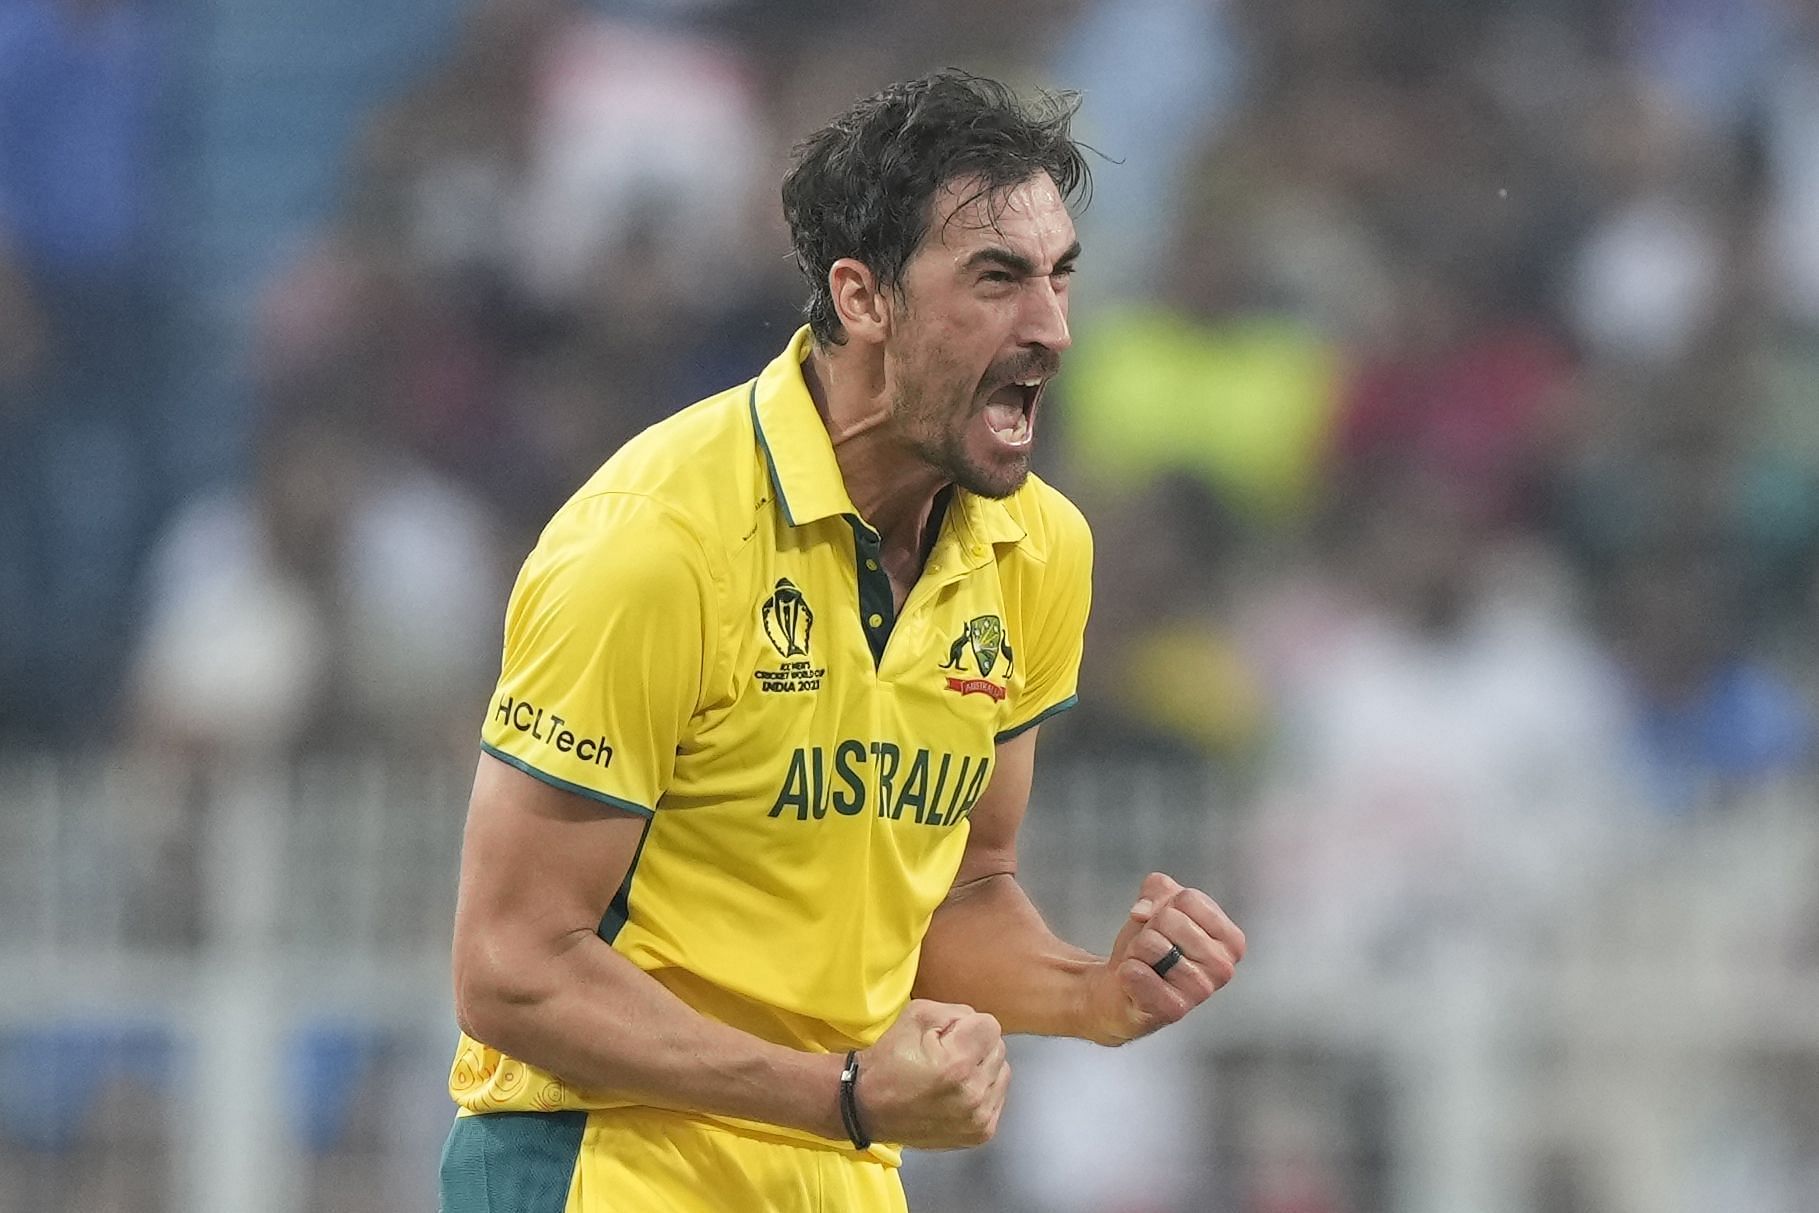 Mitchell Starc registered figures of 3/34 in 10 overs. [P/C: AP]